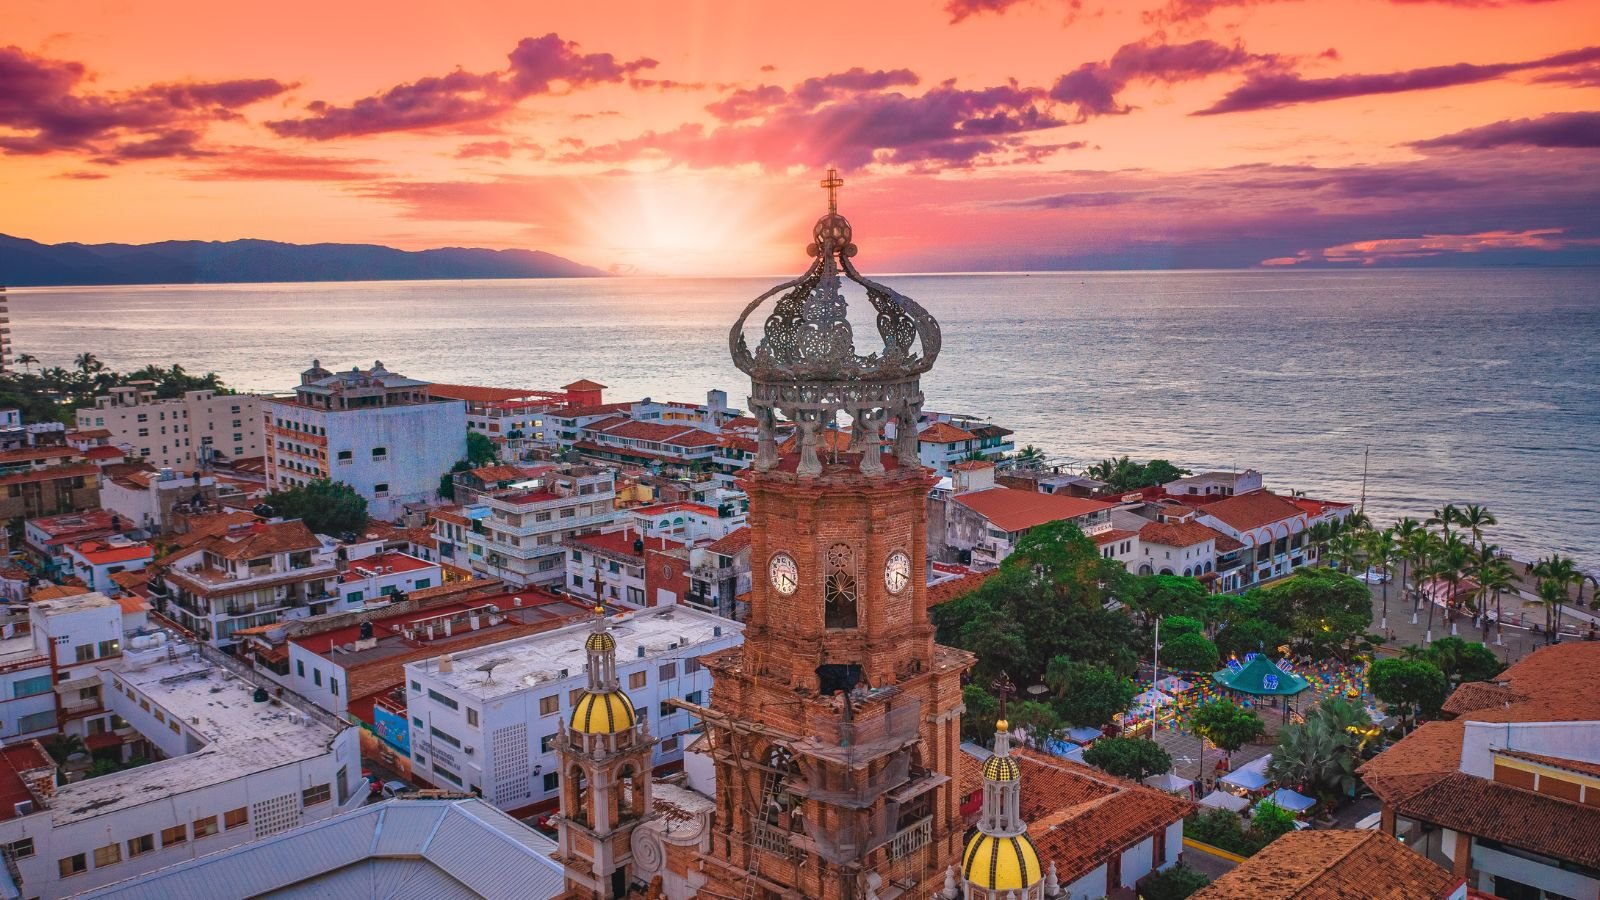 <p>Puerto Vallarta, stretching 30 miles along Banderas Bay, has been an expat haven for 60 years. The vibrant coastal city offers a perfect blend of beach life and cultural experiences for <a href="https://mexicorelocationguide.com/retire-in-puerto-vallarta/#:~:text=The%20overall%20population%20in%20Puerto,in%20the%20city%20year%2Dround." rel="noopener">over 40,000 expats</a>. The Riviera Nayarit area provides endless activities, from golfing to mountain adventure. With excellent healthcare facilities and easy flights to the U.S., it is a top choice for medical tourism. Moreover, the cost of living is within $2000 per month, making this city an affordable choice.</p>